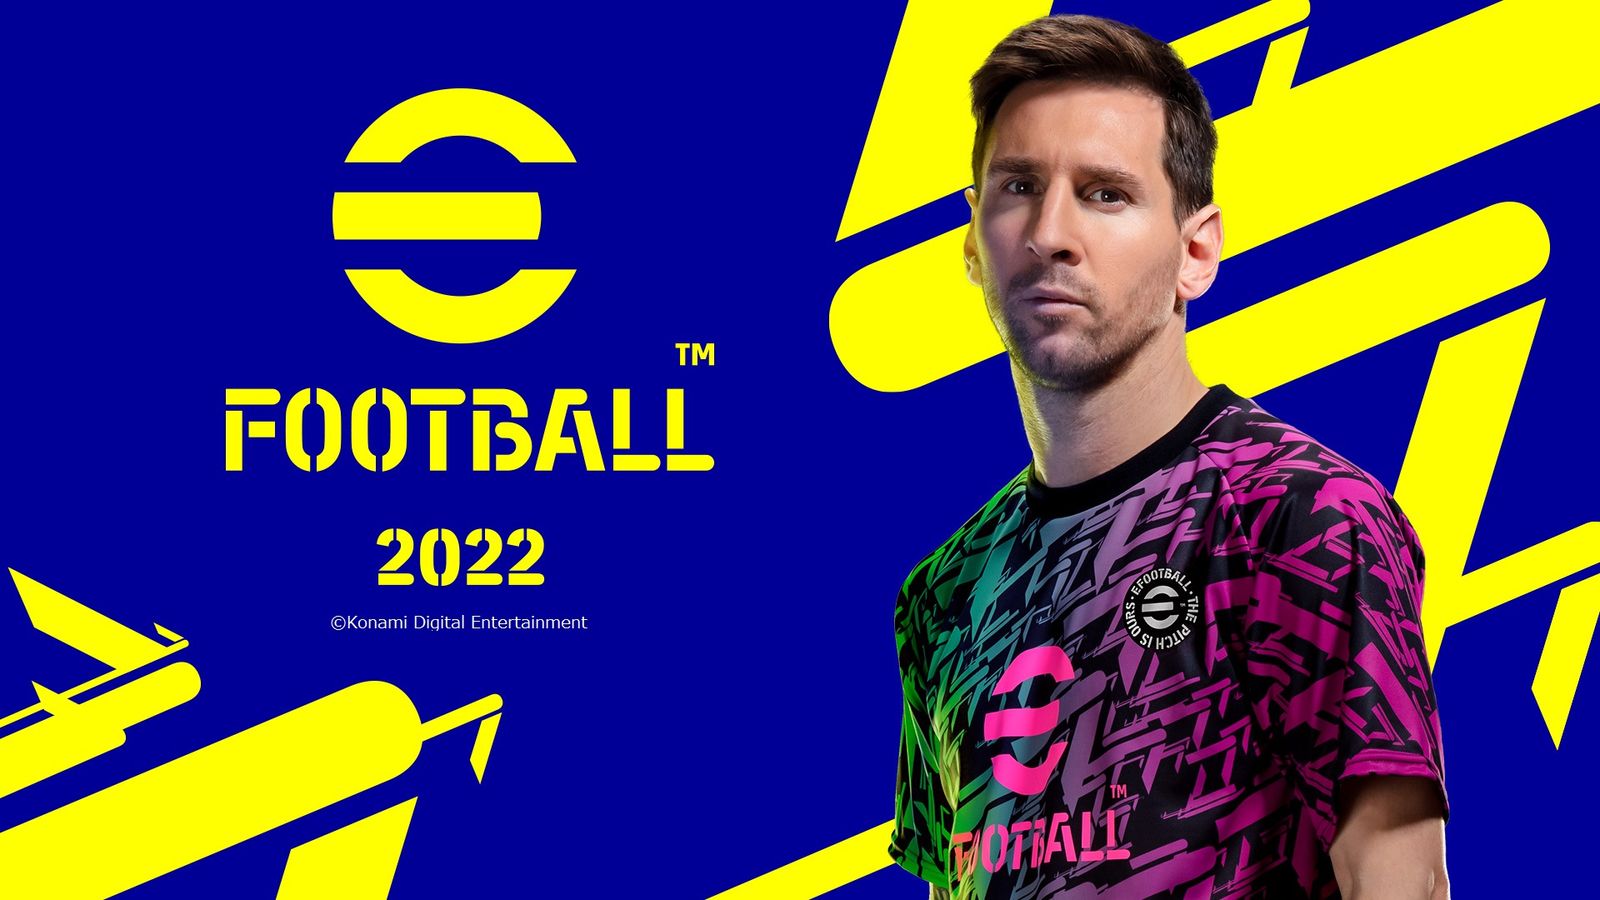 efootball 2022 official title